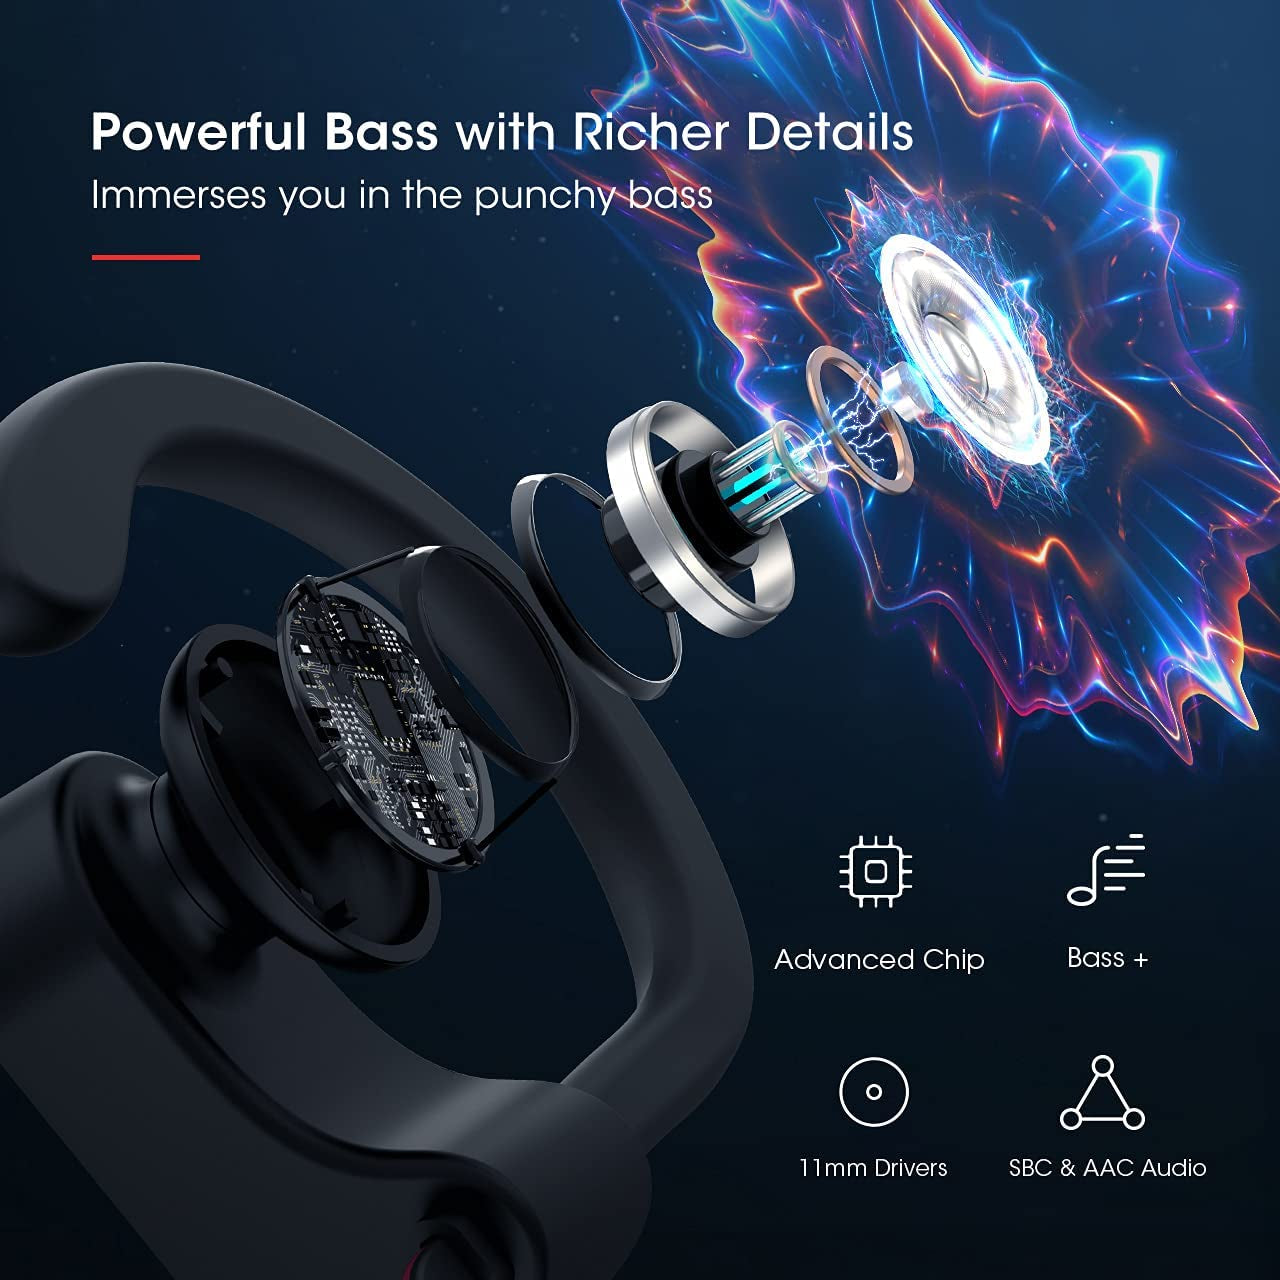 Bluetooth Headphones, Running Headphones W/16 Hrs Playtime, Hi-Fi Stereo Sports Earbuds IPX7 Waterproof/Cvc6.0 Noise Cancelling Microphone Wireless Earphones, Headsets for Workout,Gym